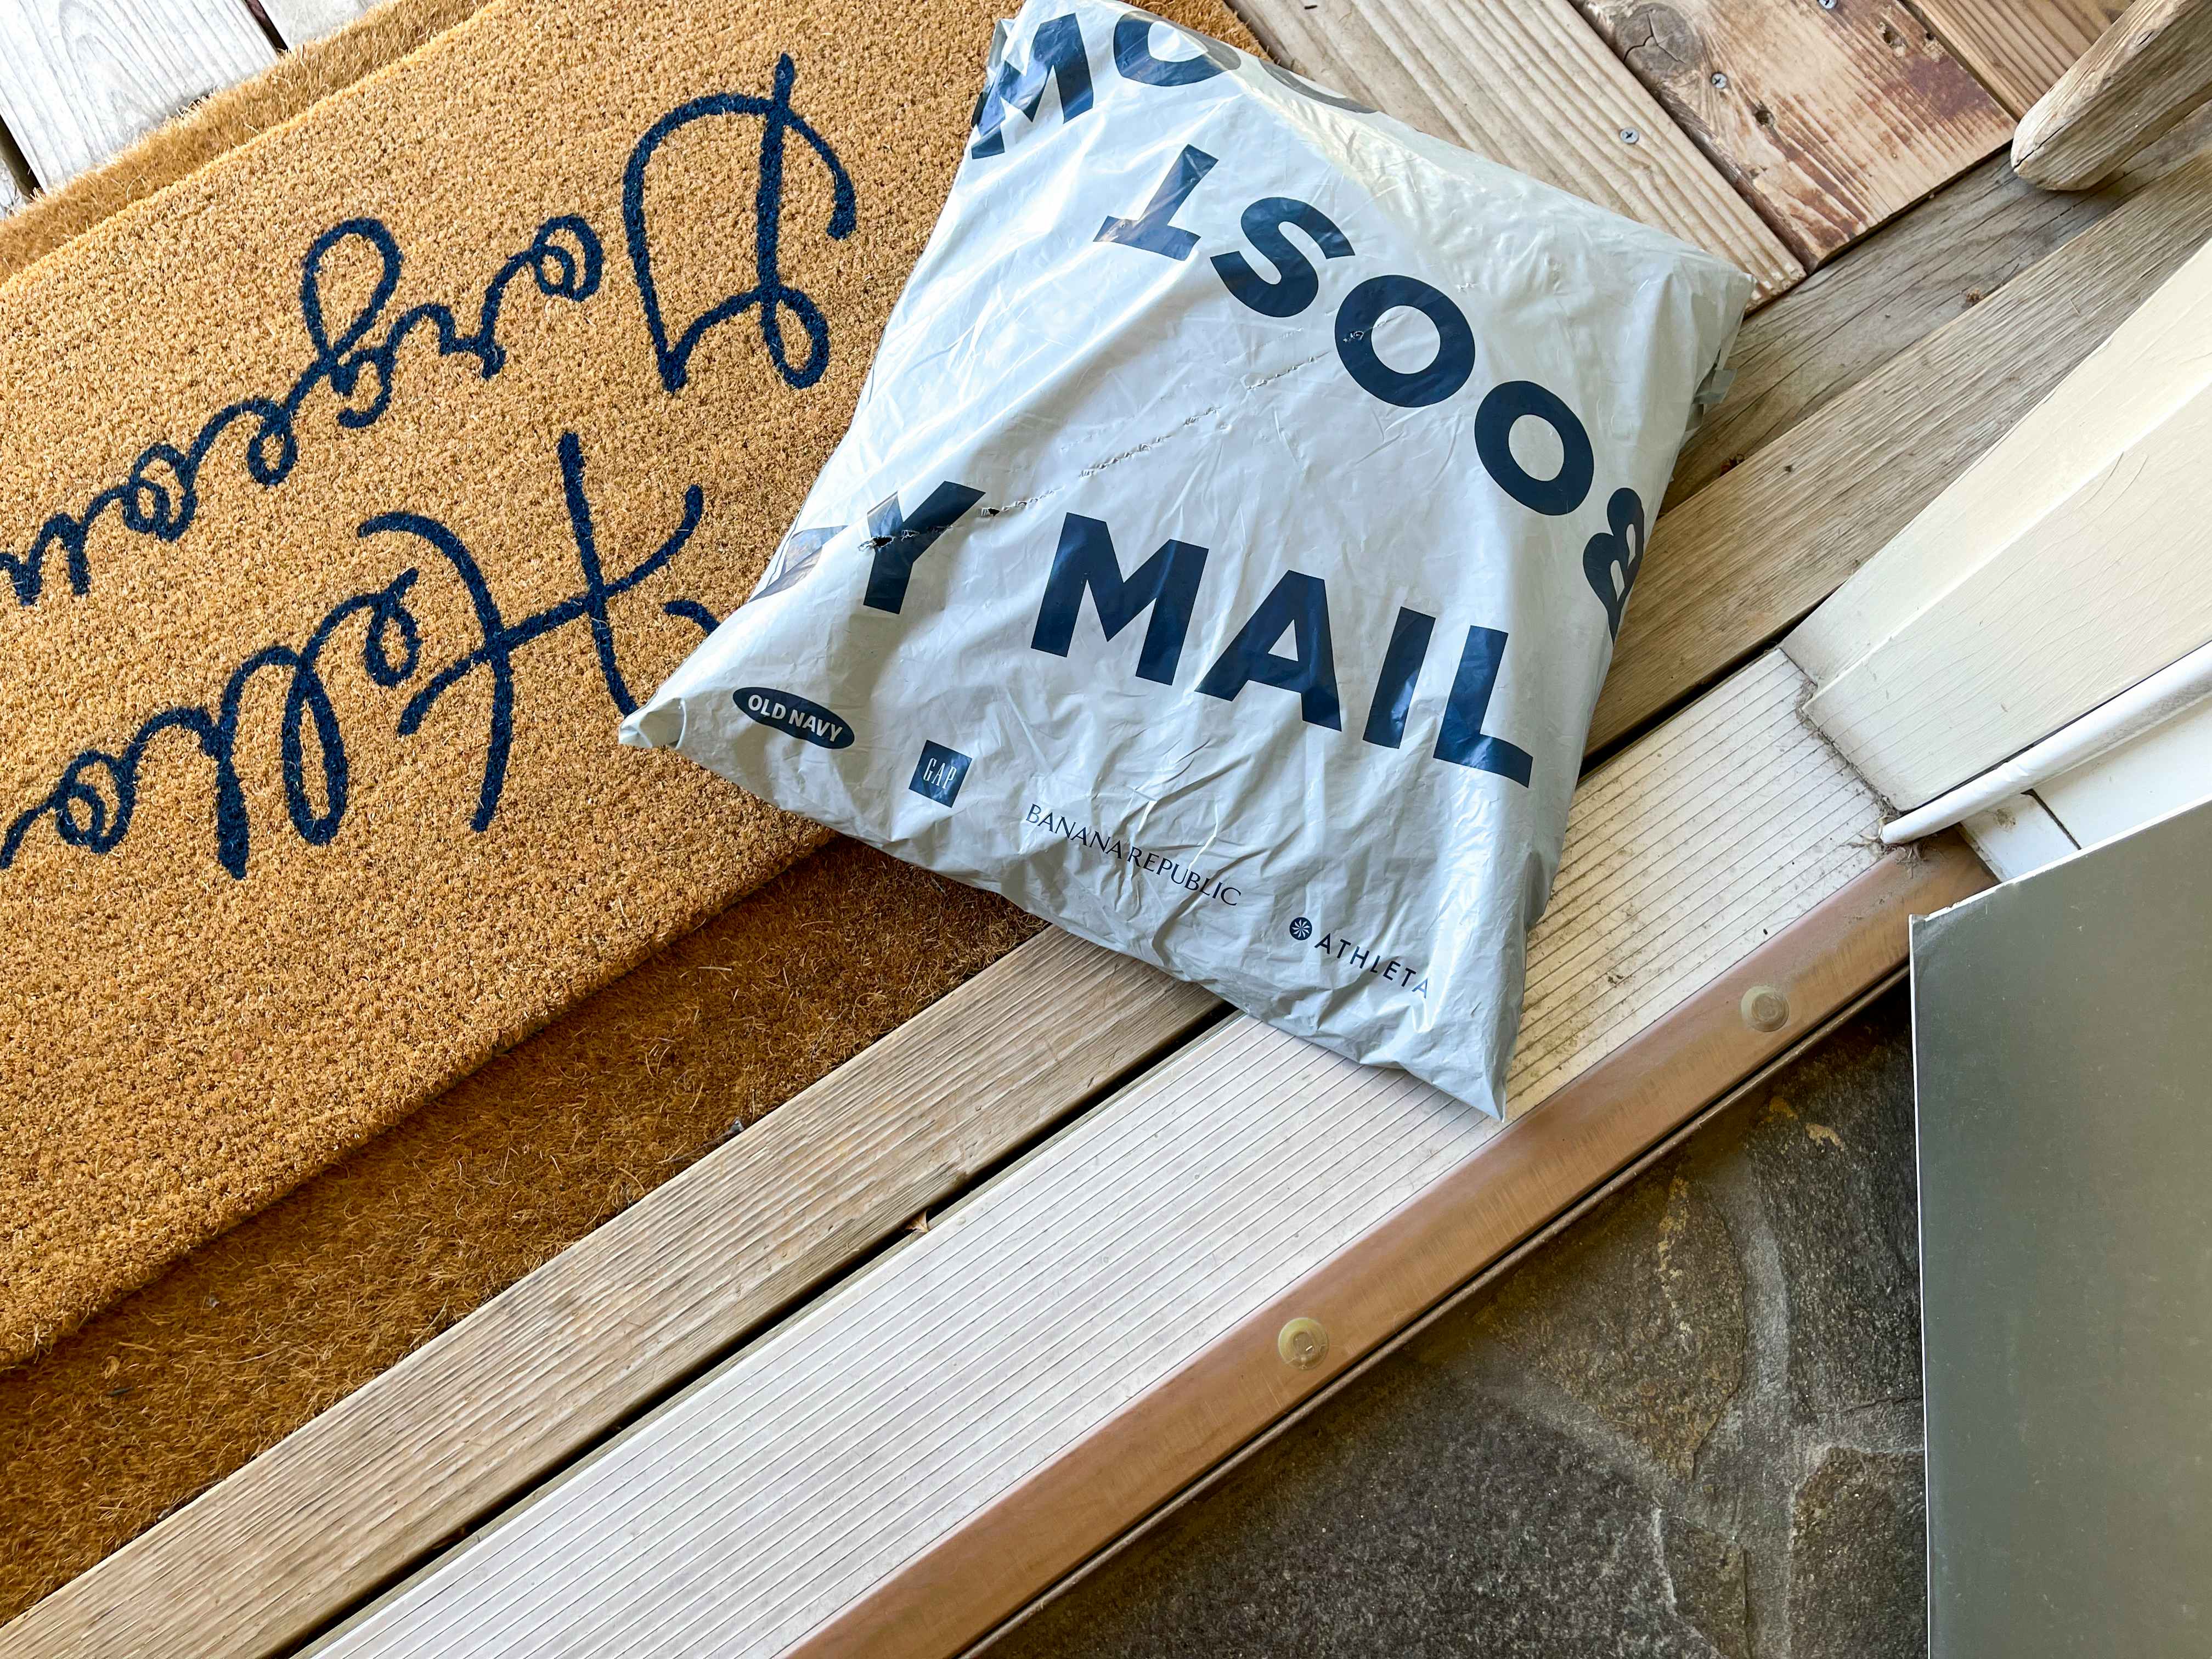 A plastic delivery bag sitting on a doormat.